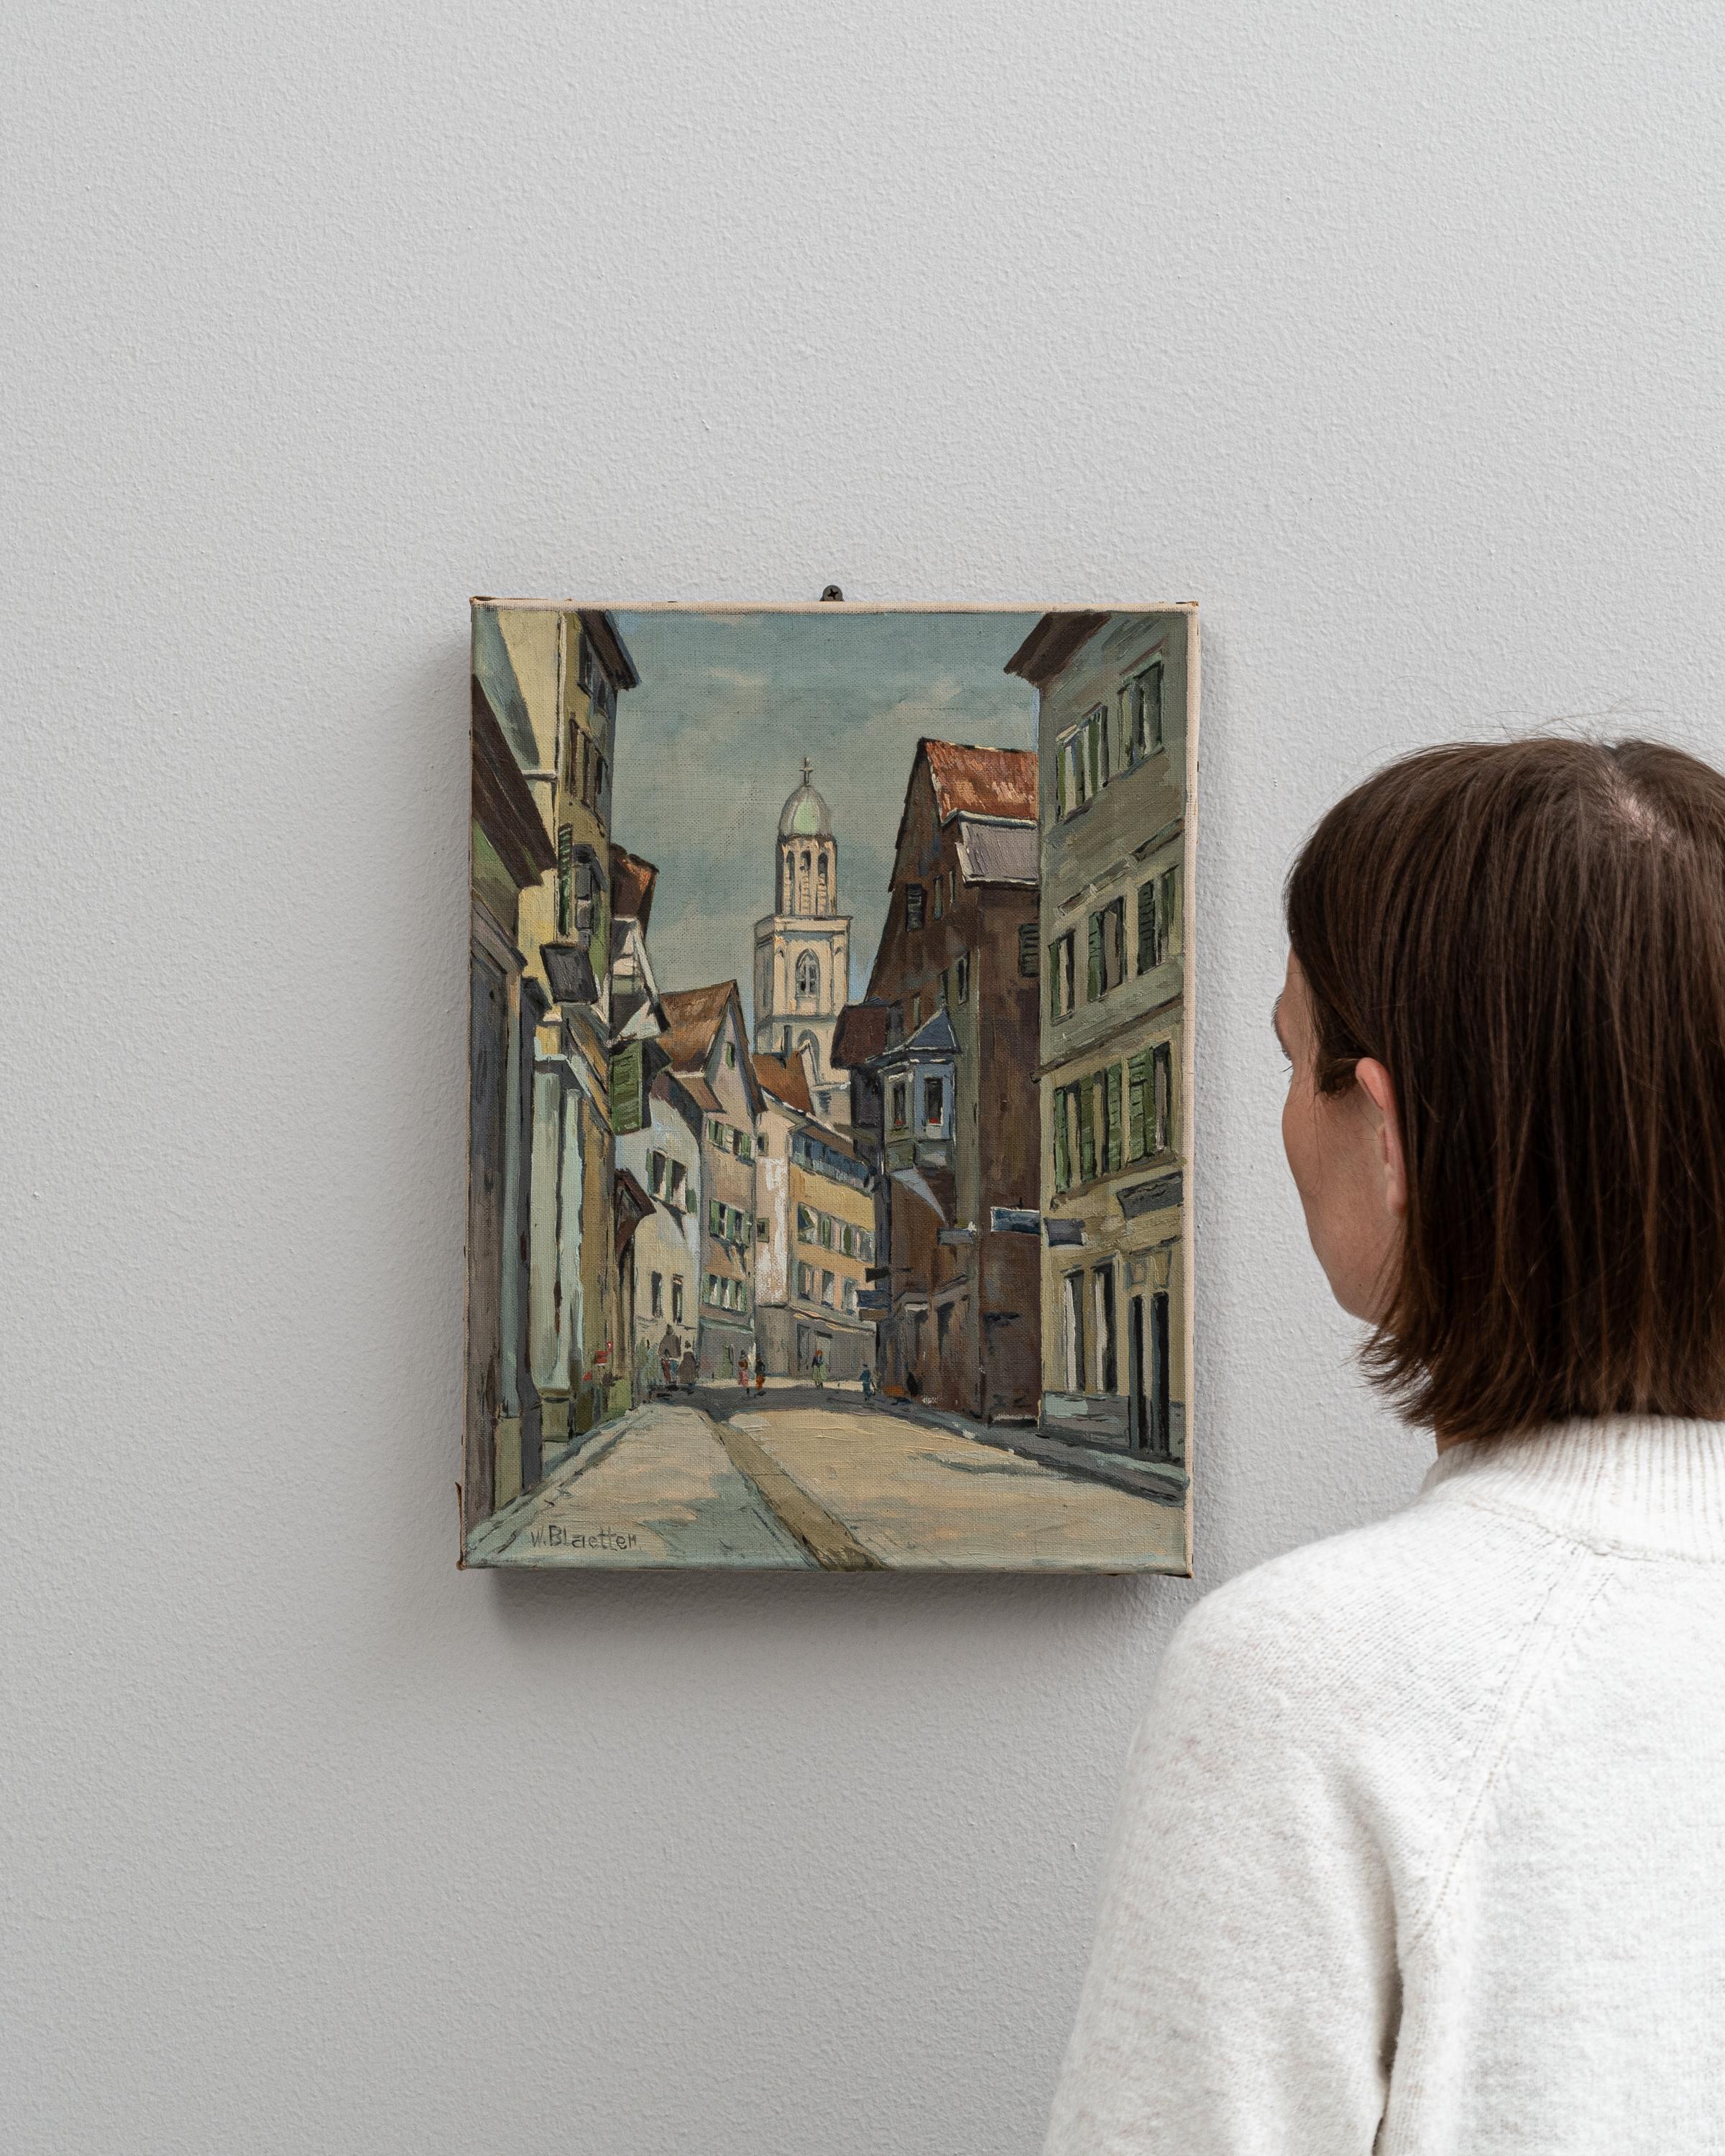 This charming 20th-century Belgian painting offers a vivid portrayal of an old European street, likely nestled in a historic city known for its rich culture and architecture. The artist captures the essence of European street life with sharp,